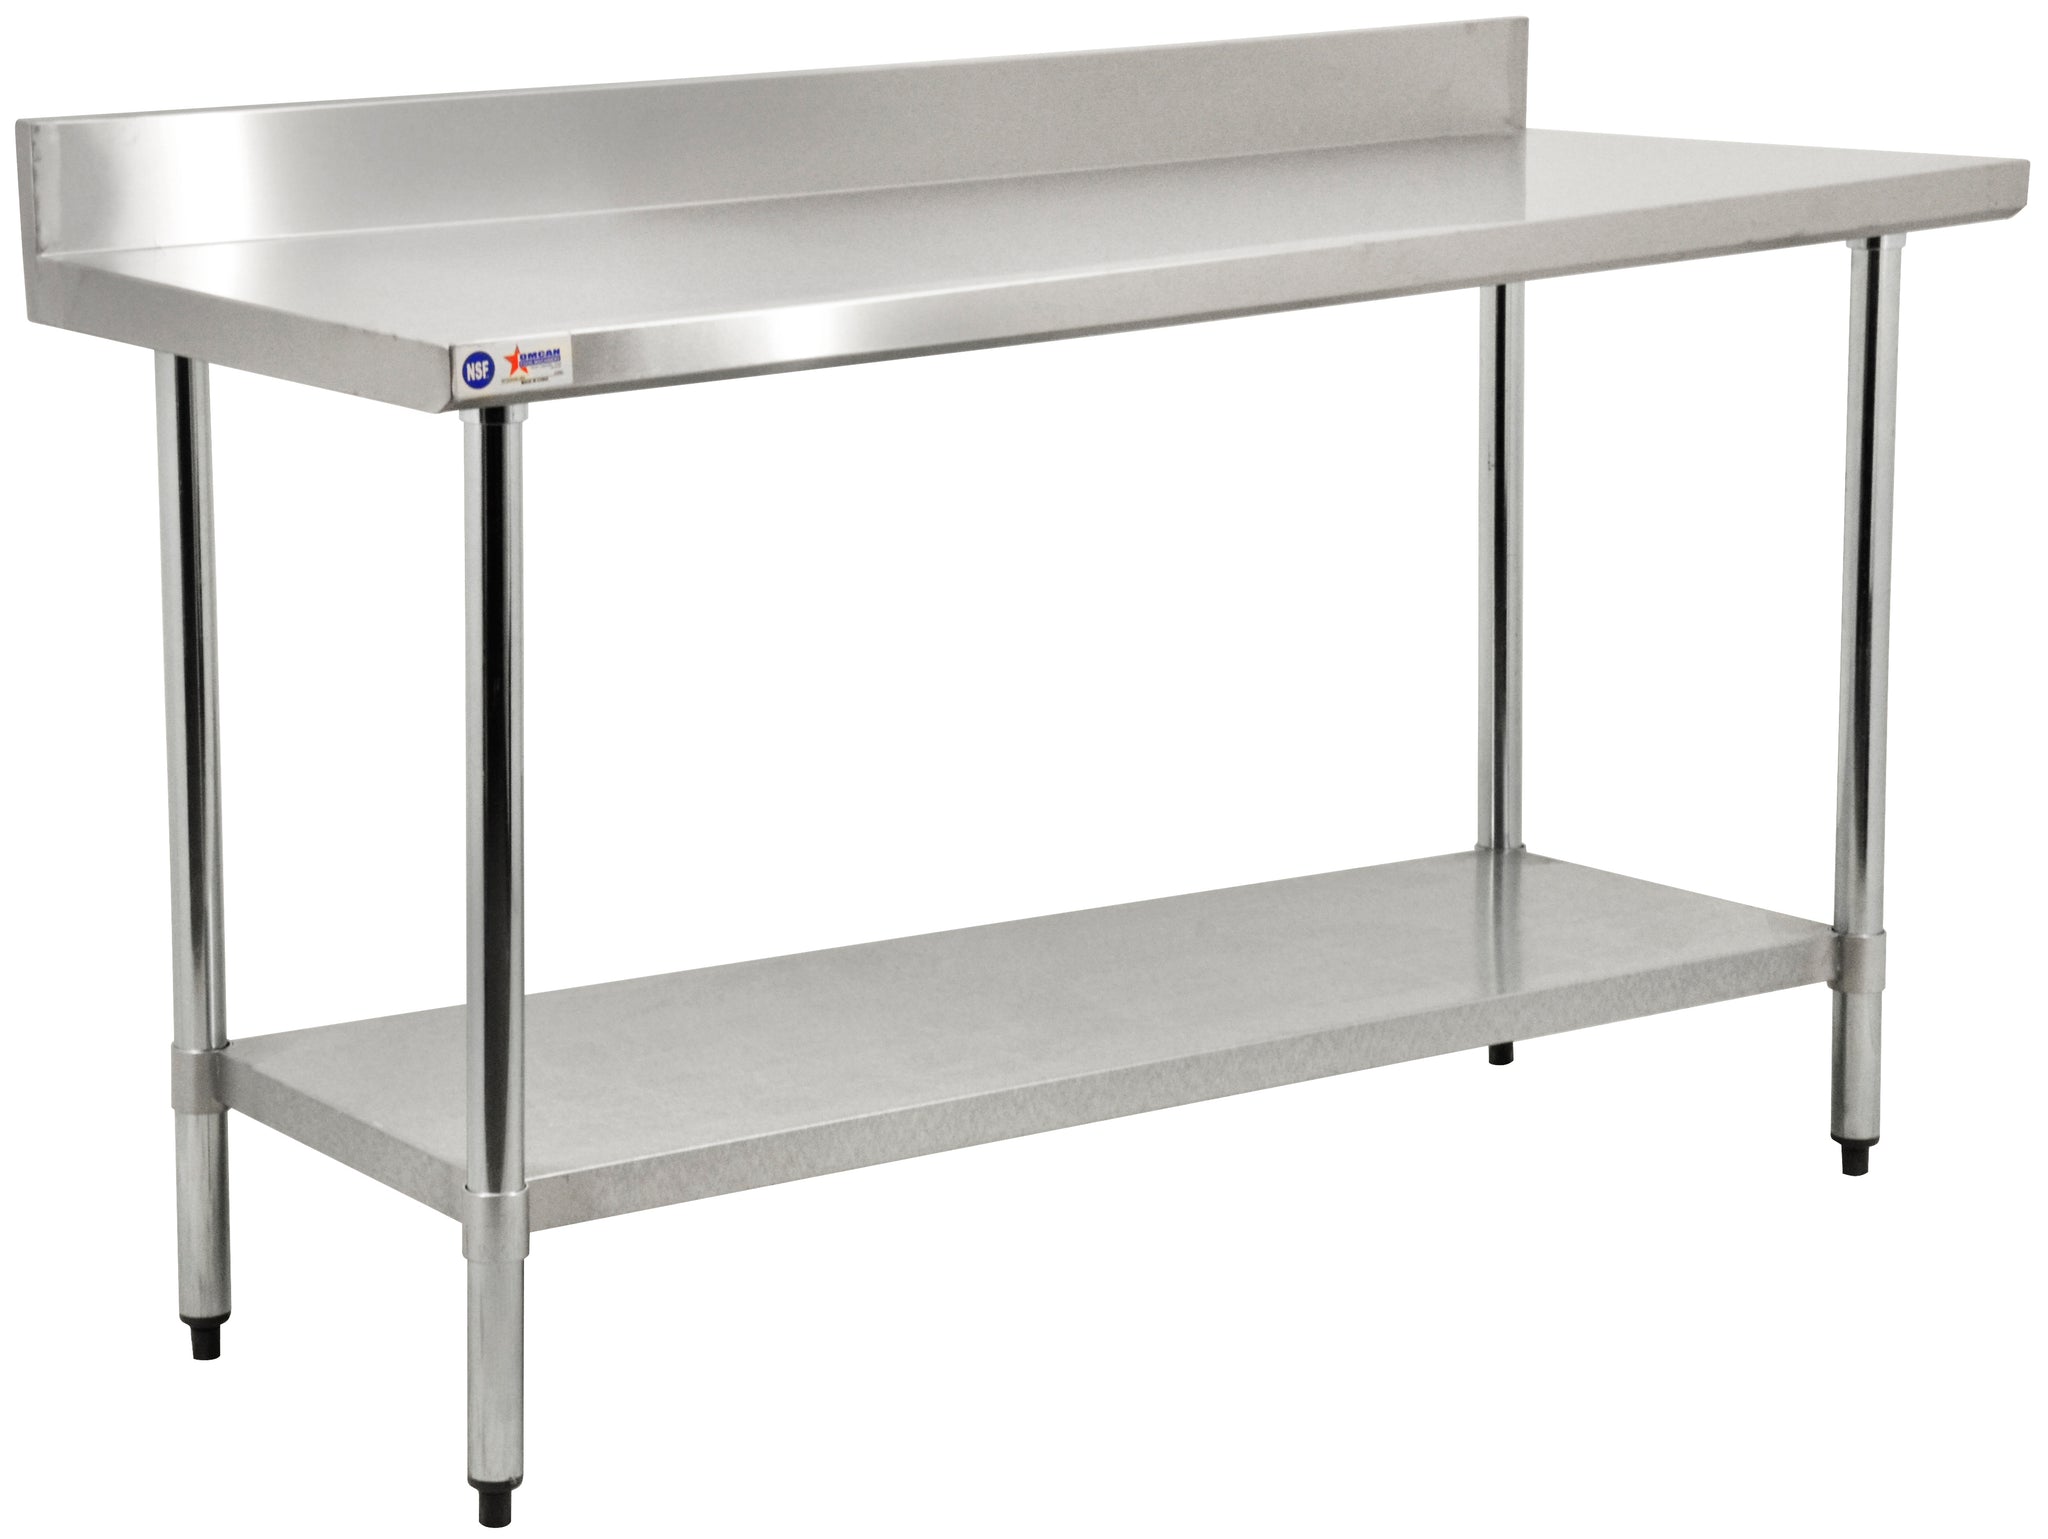 24 x48 stainless steel kitchen work table w wire low